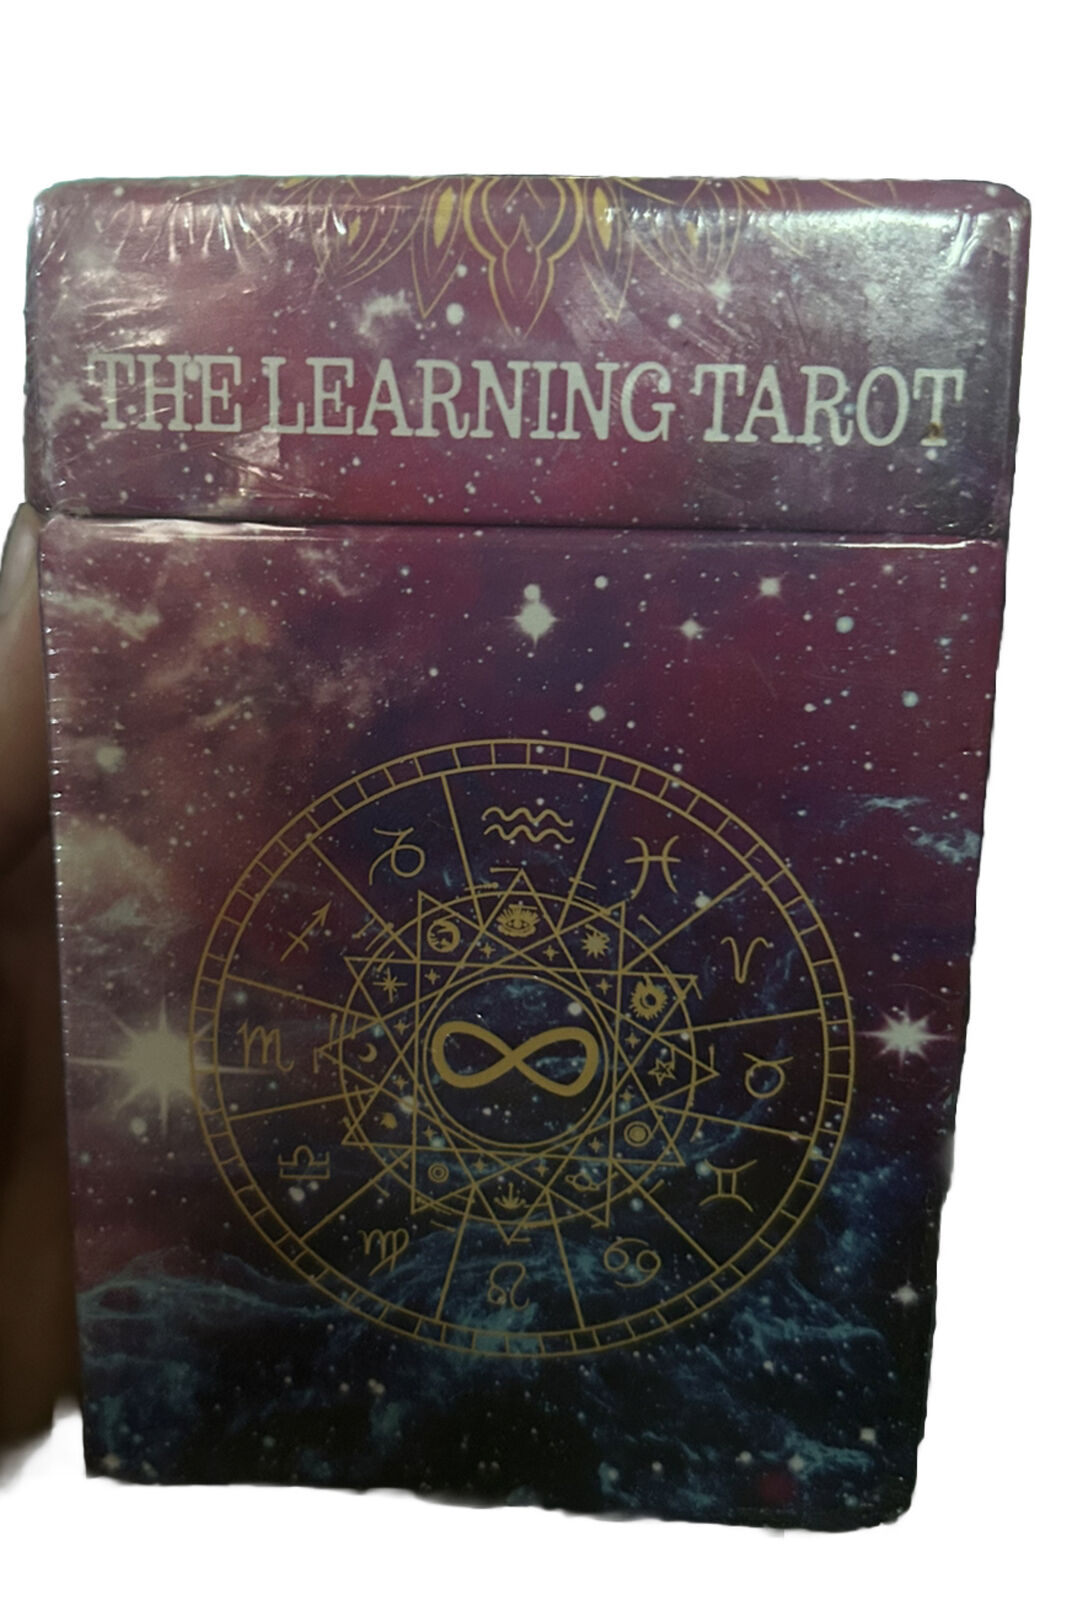 The Learning Tarot Learn to Read the Cards Tarot Deck & Book Set for Beginners